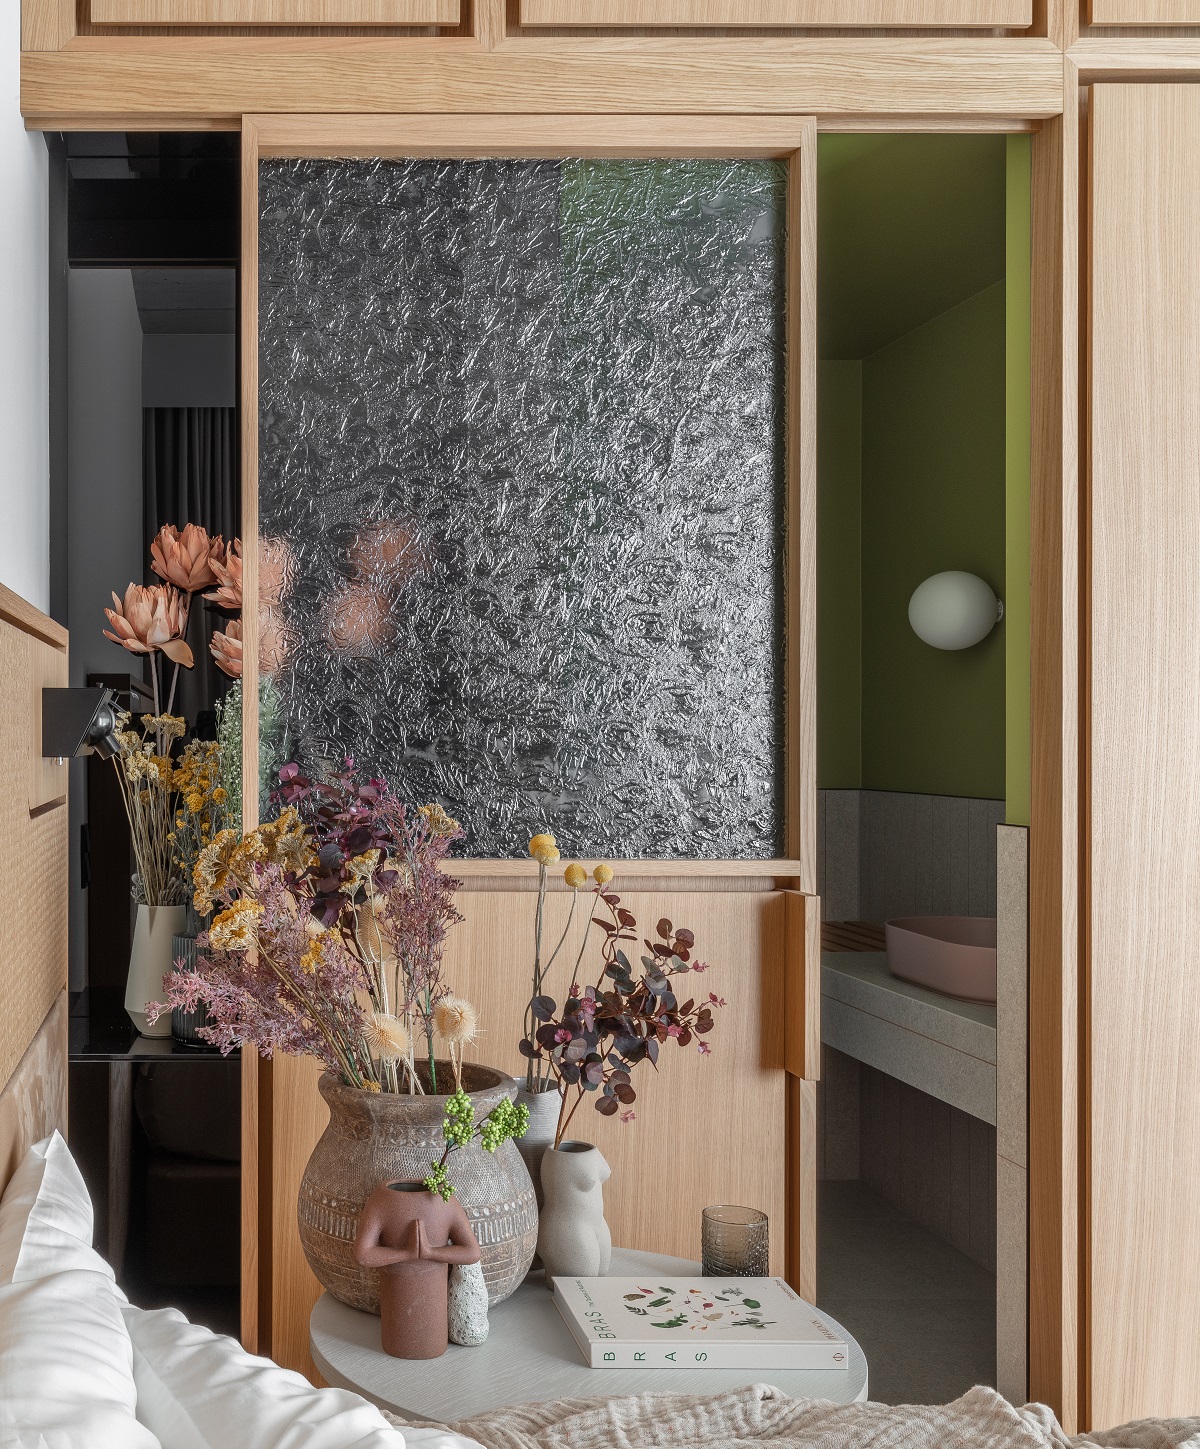 textured glass and wooden panels between the bathroom and the guestroom